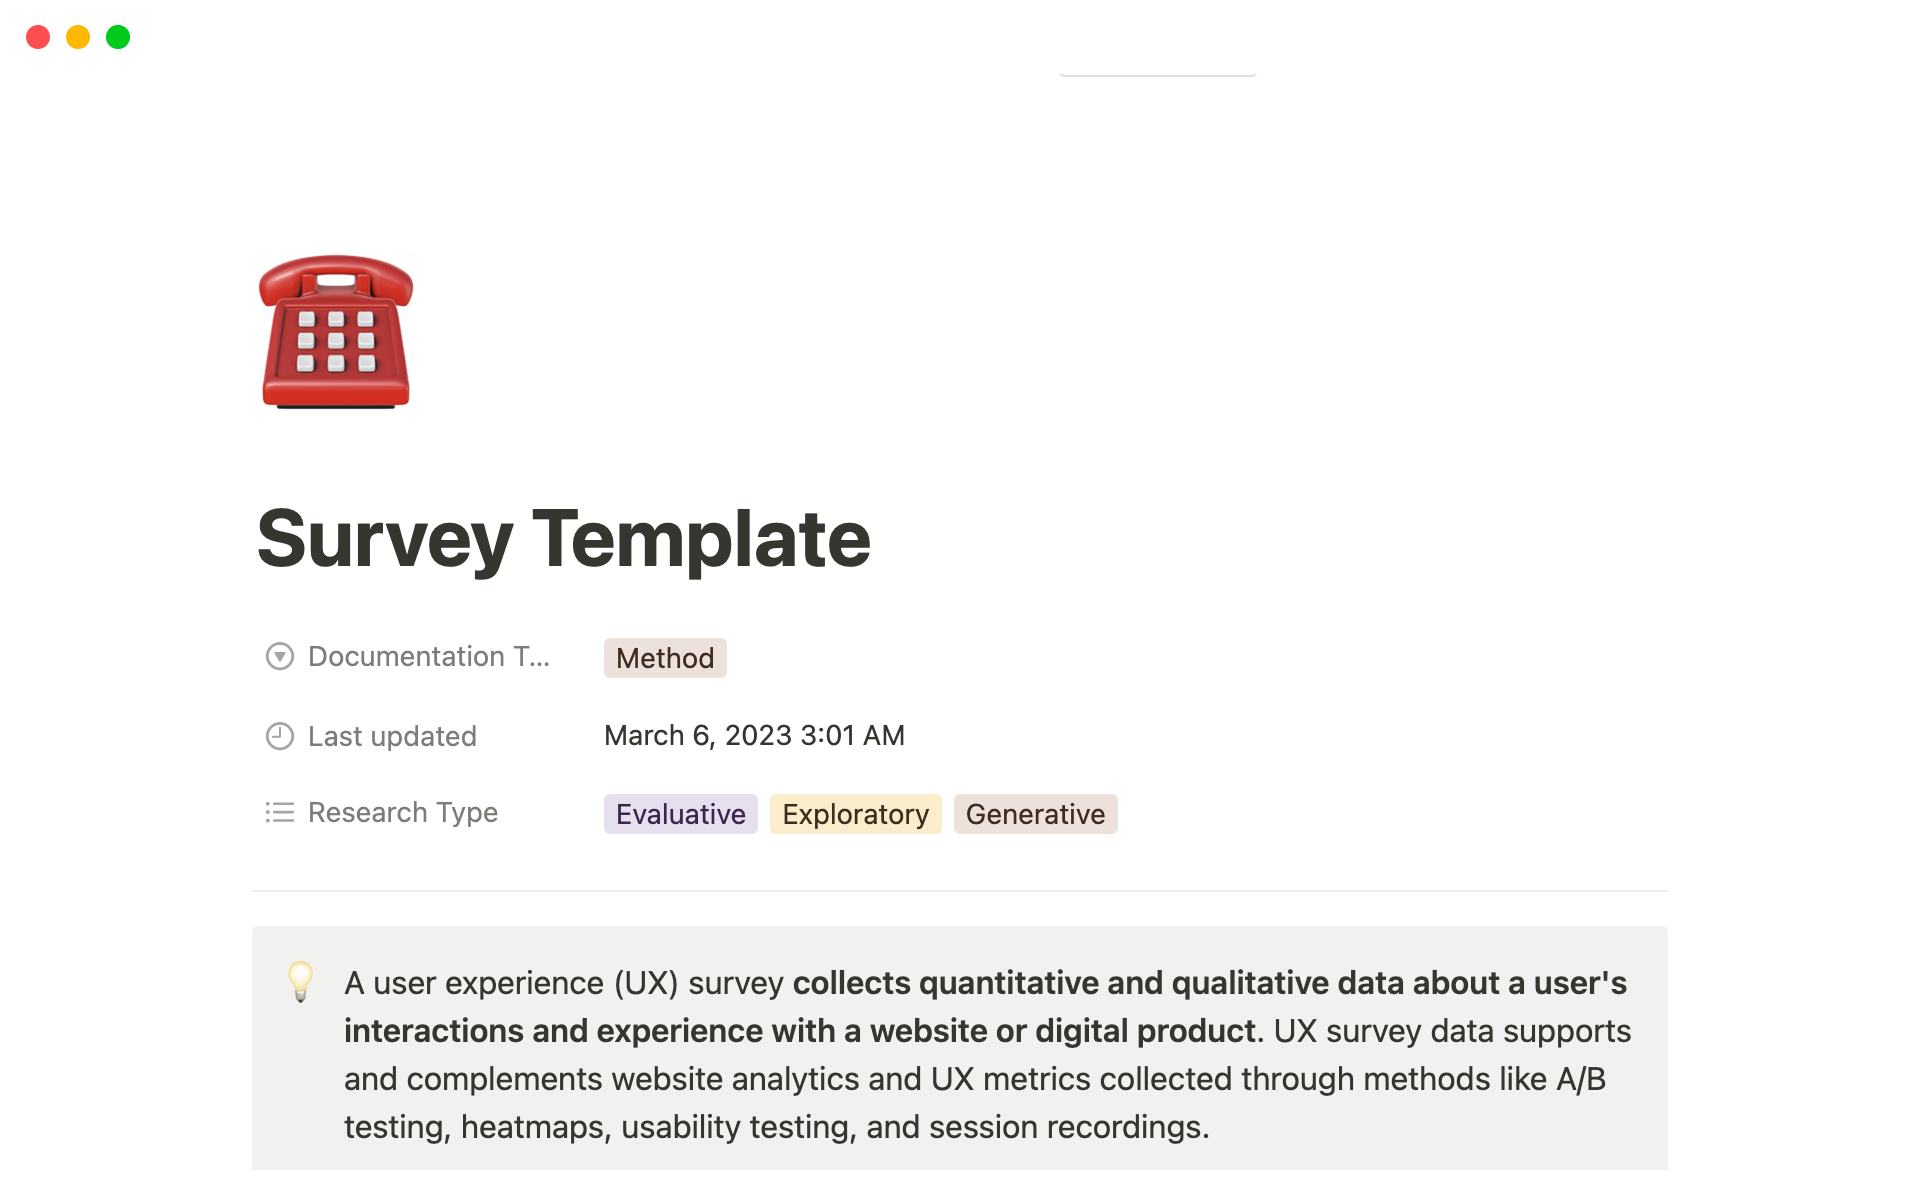 This template will help UX Researchers plan and set up a survey as a method as part of their research project